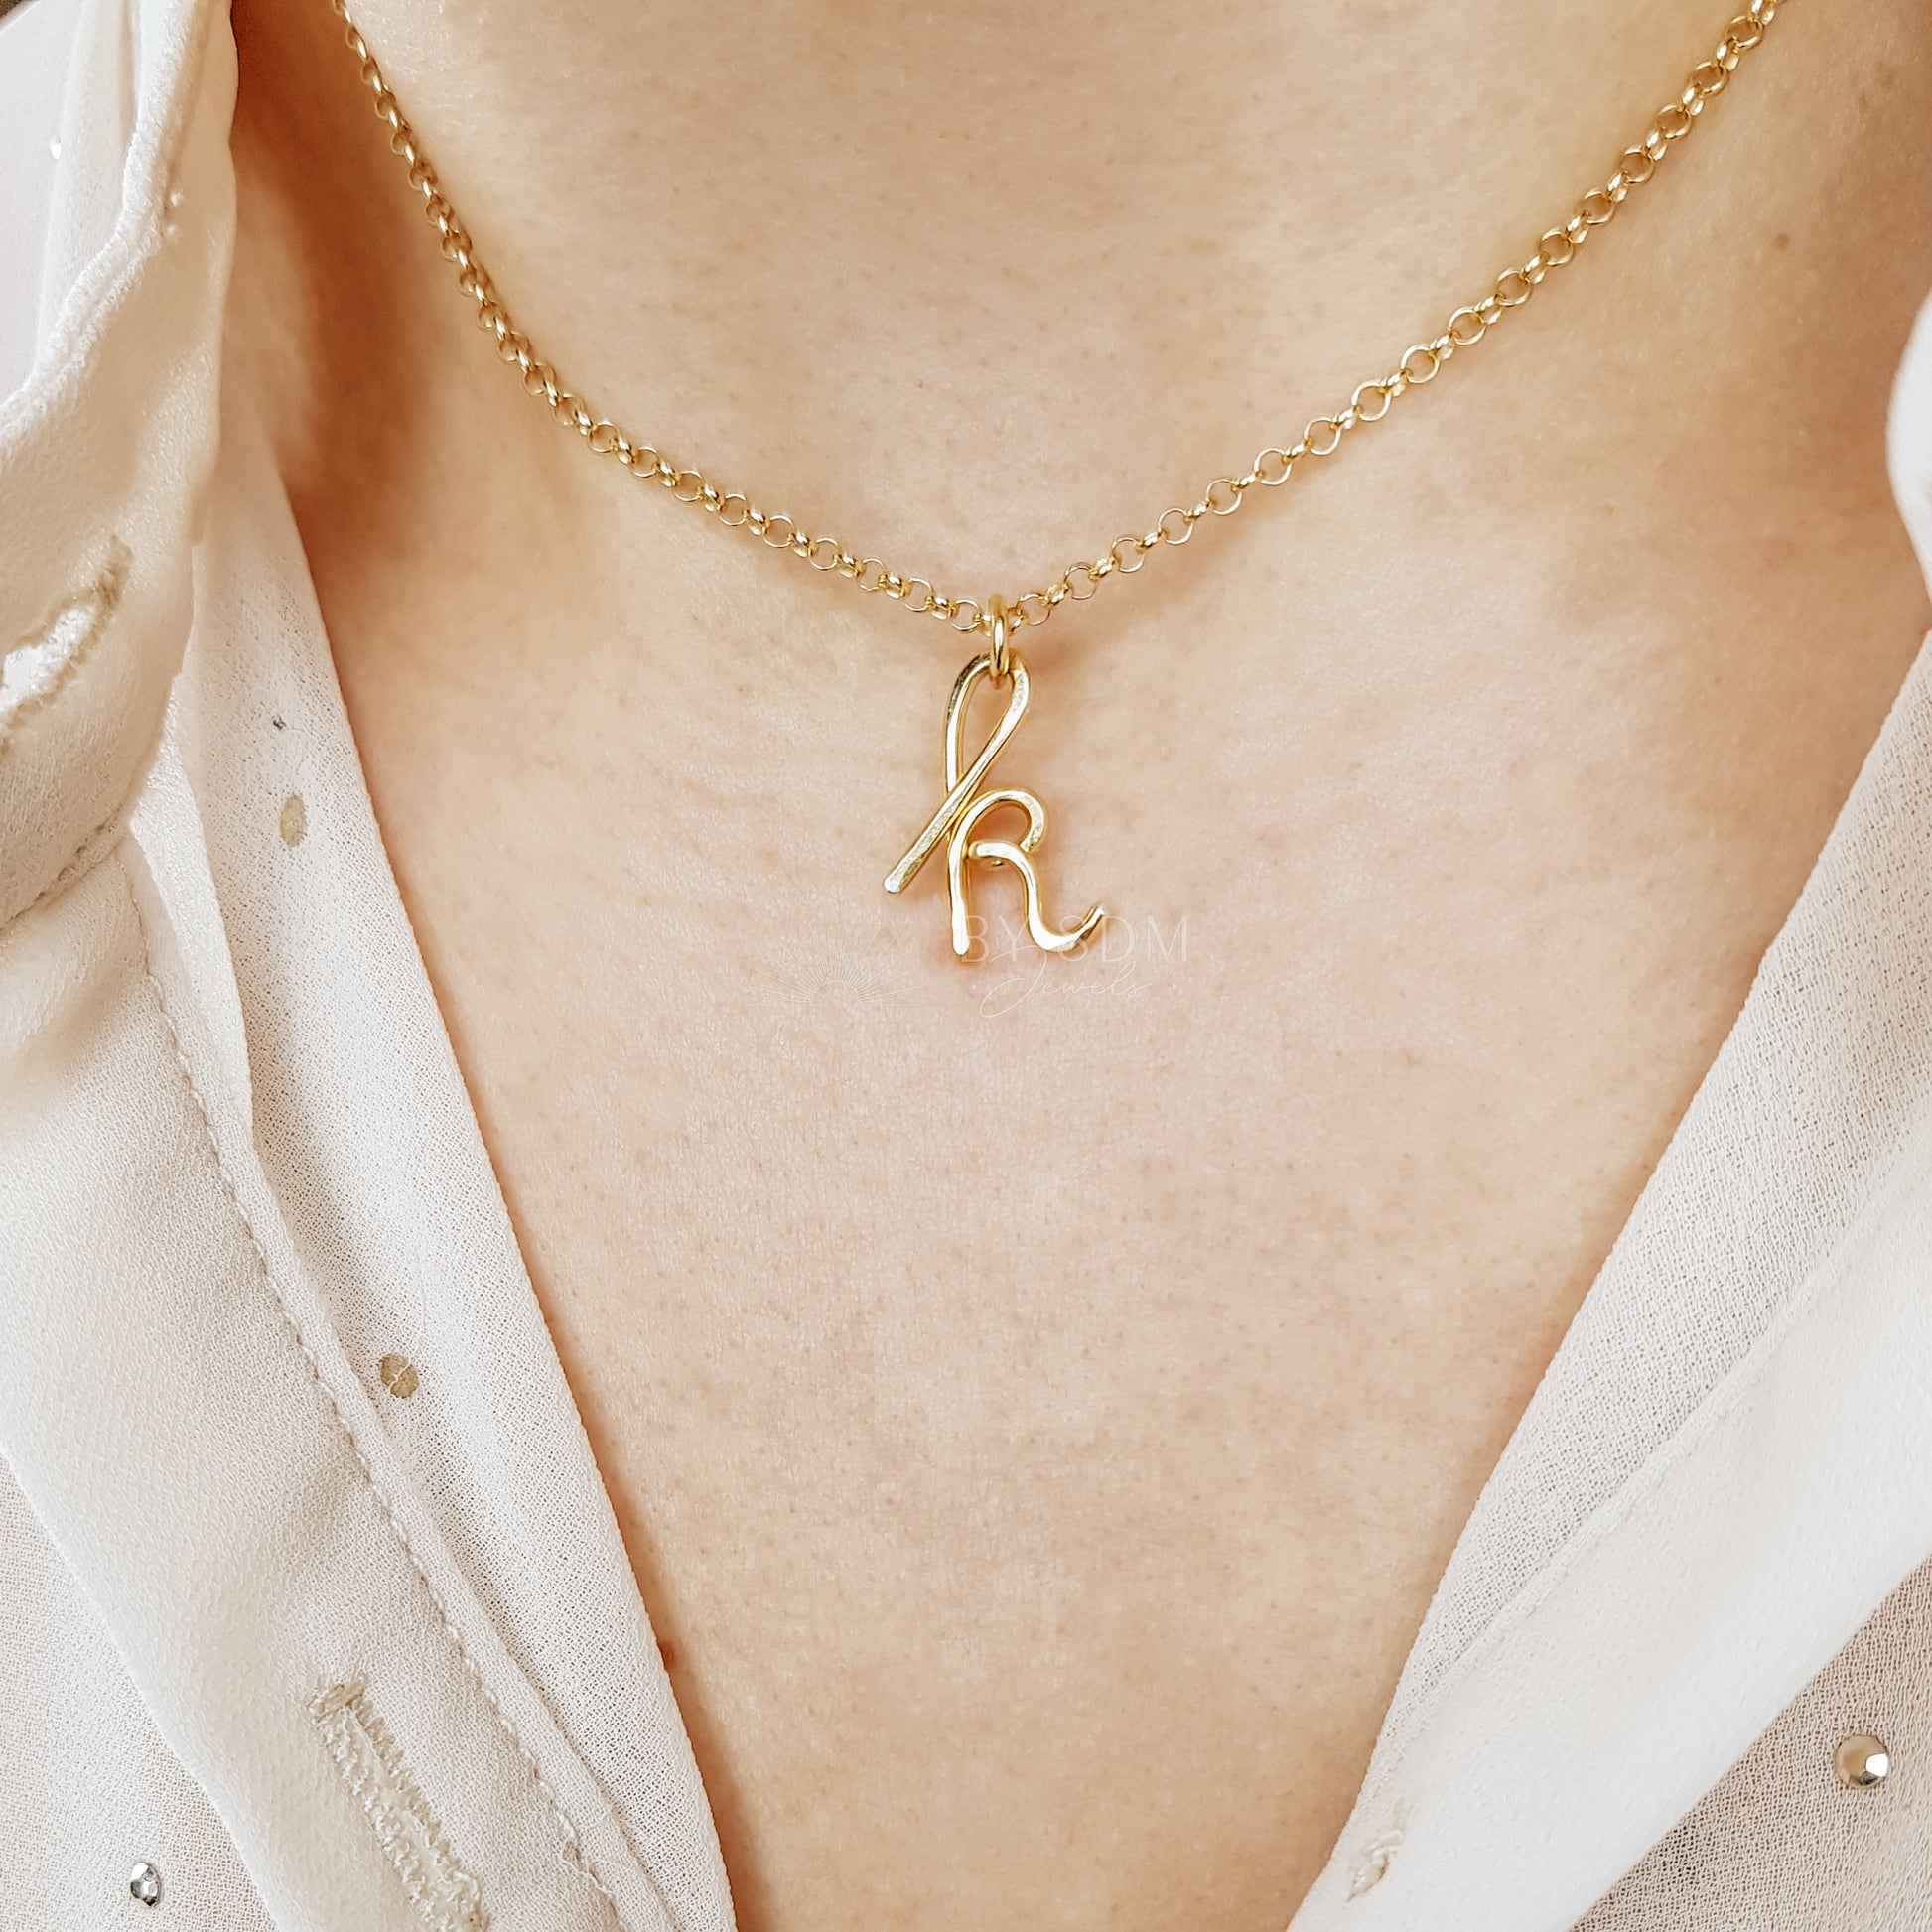 X Initial Necklace • Personalized Necklace • Perfect Dainty Necklace for Her • Bridesmaid Gifts • Personalized Gift Custom Charm Necklace